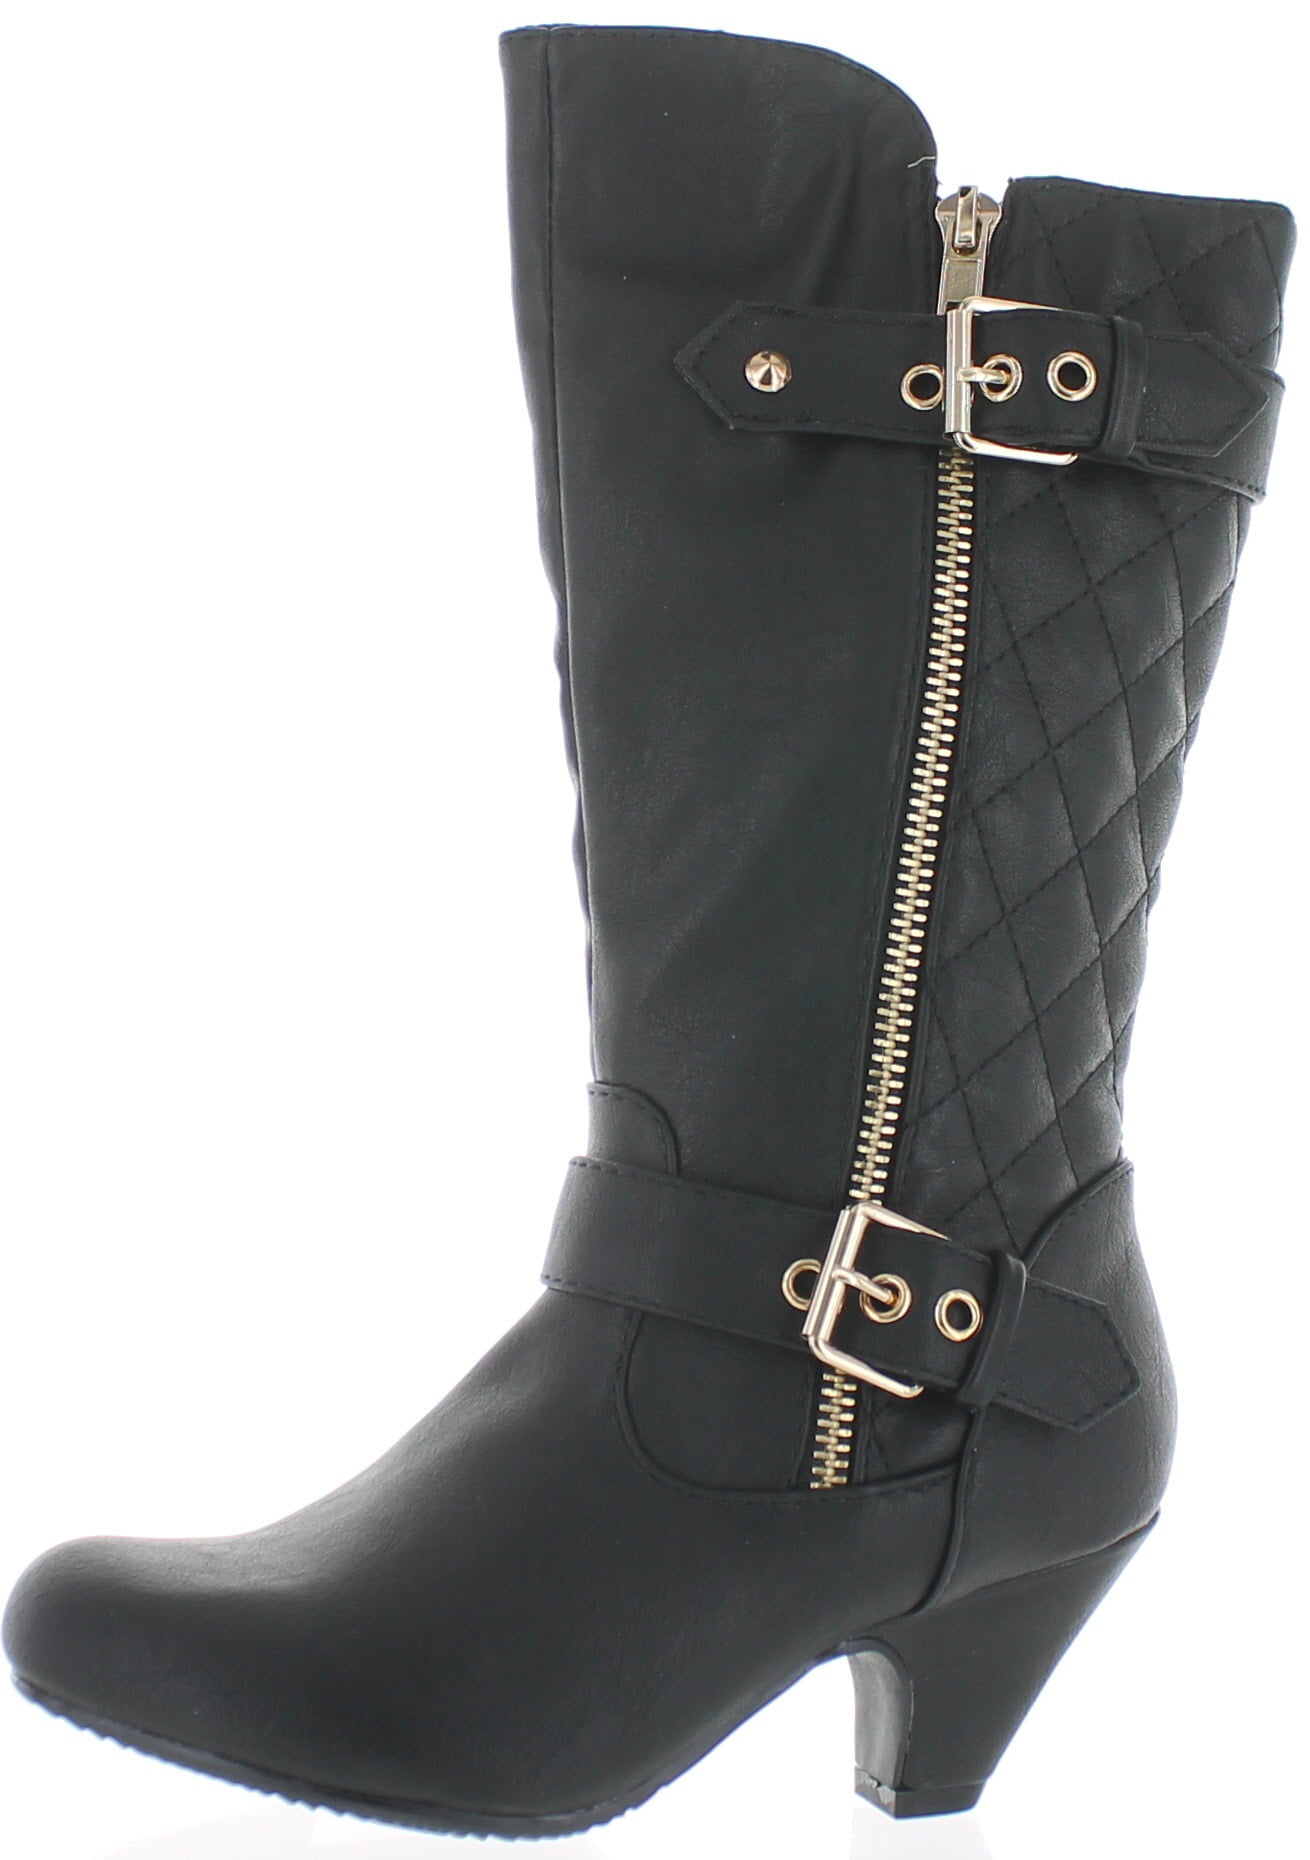 Top Moda LAND-99 Womens Quilted Knee High Low Heel Riding Boots 